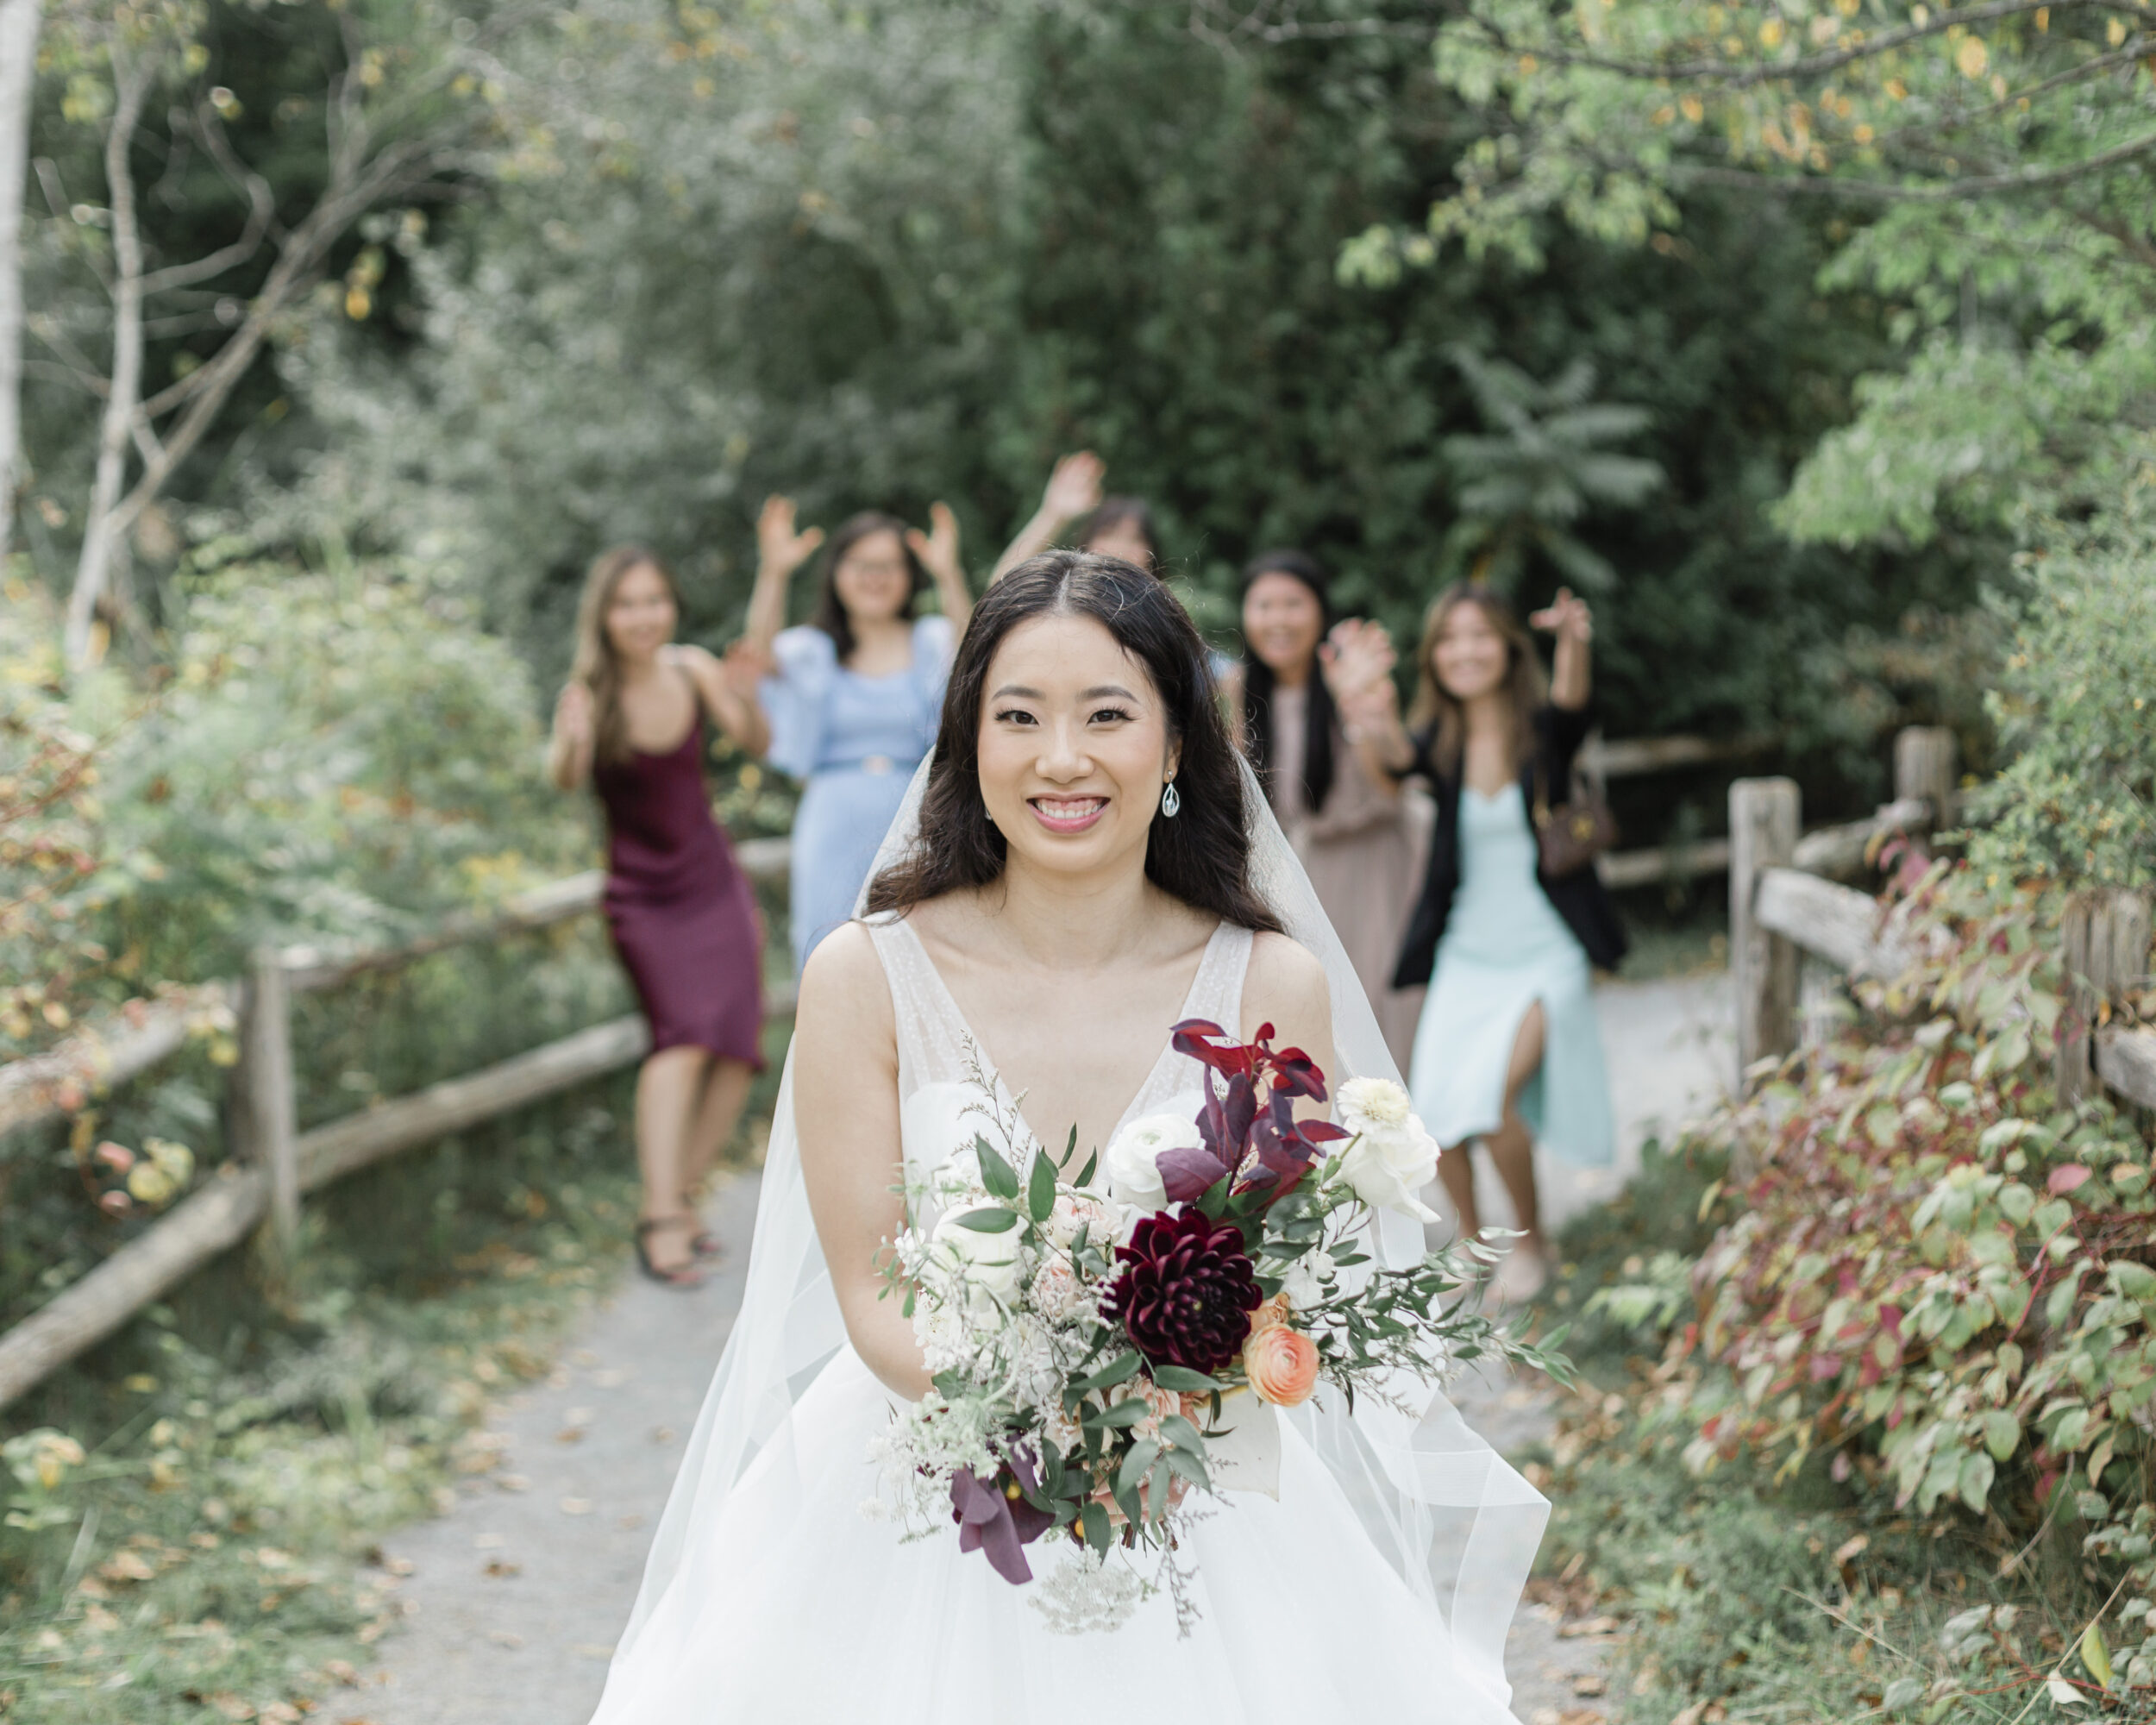 A bride walks down a Toronto nature path with her bridal party celebrating behind her.